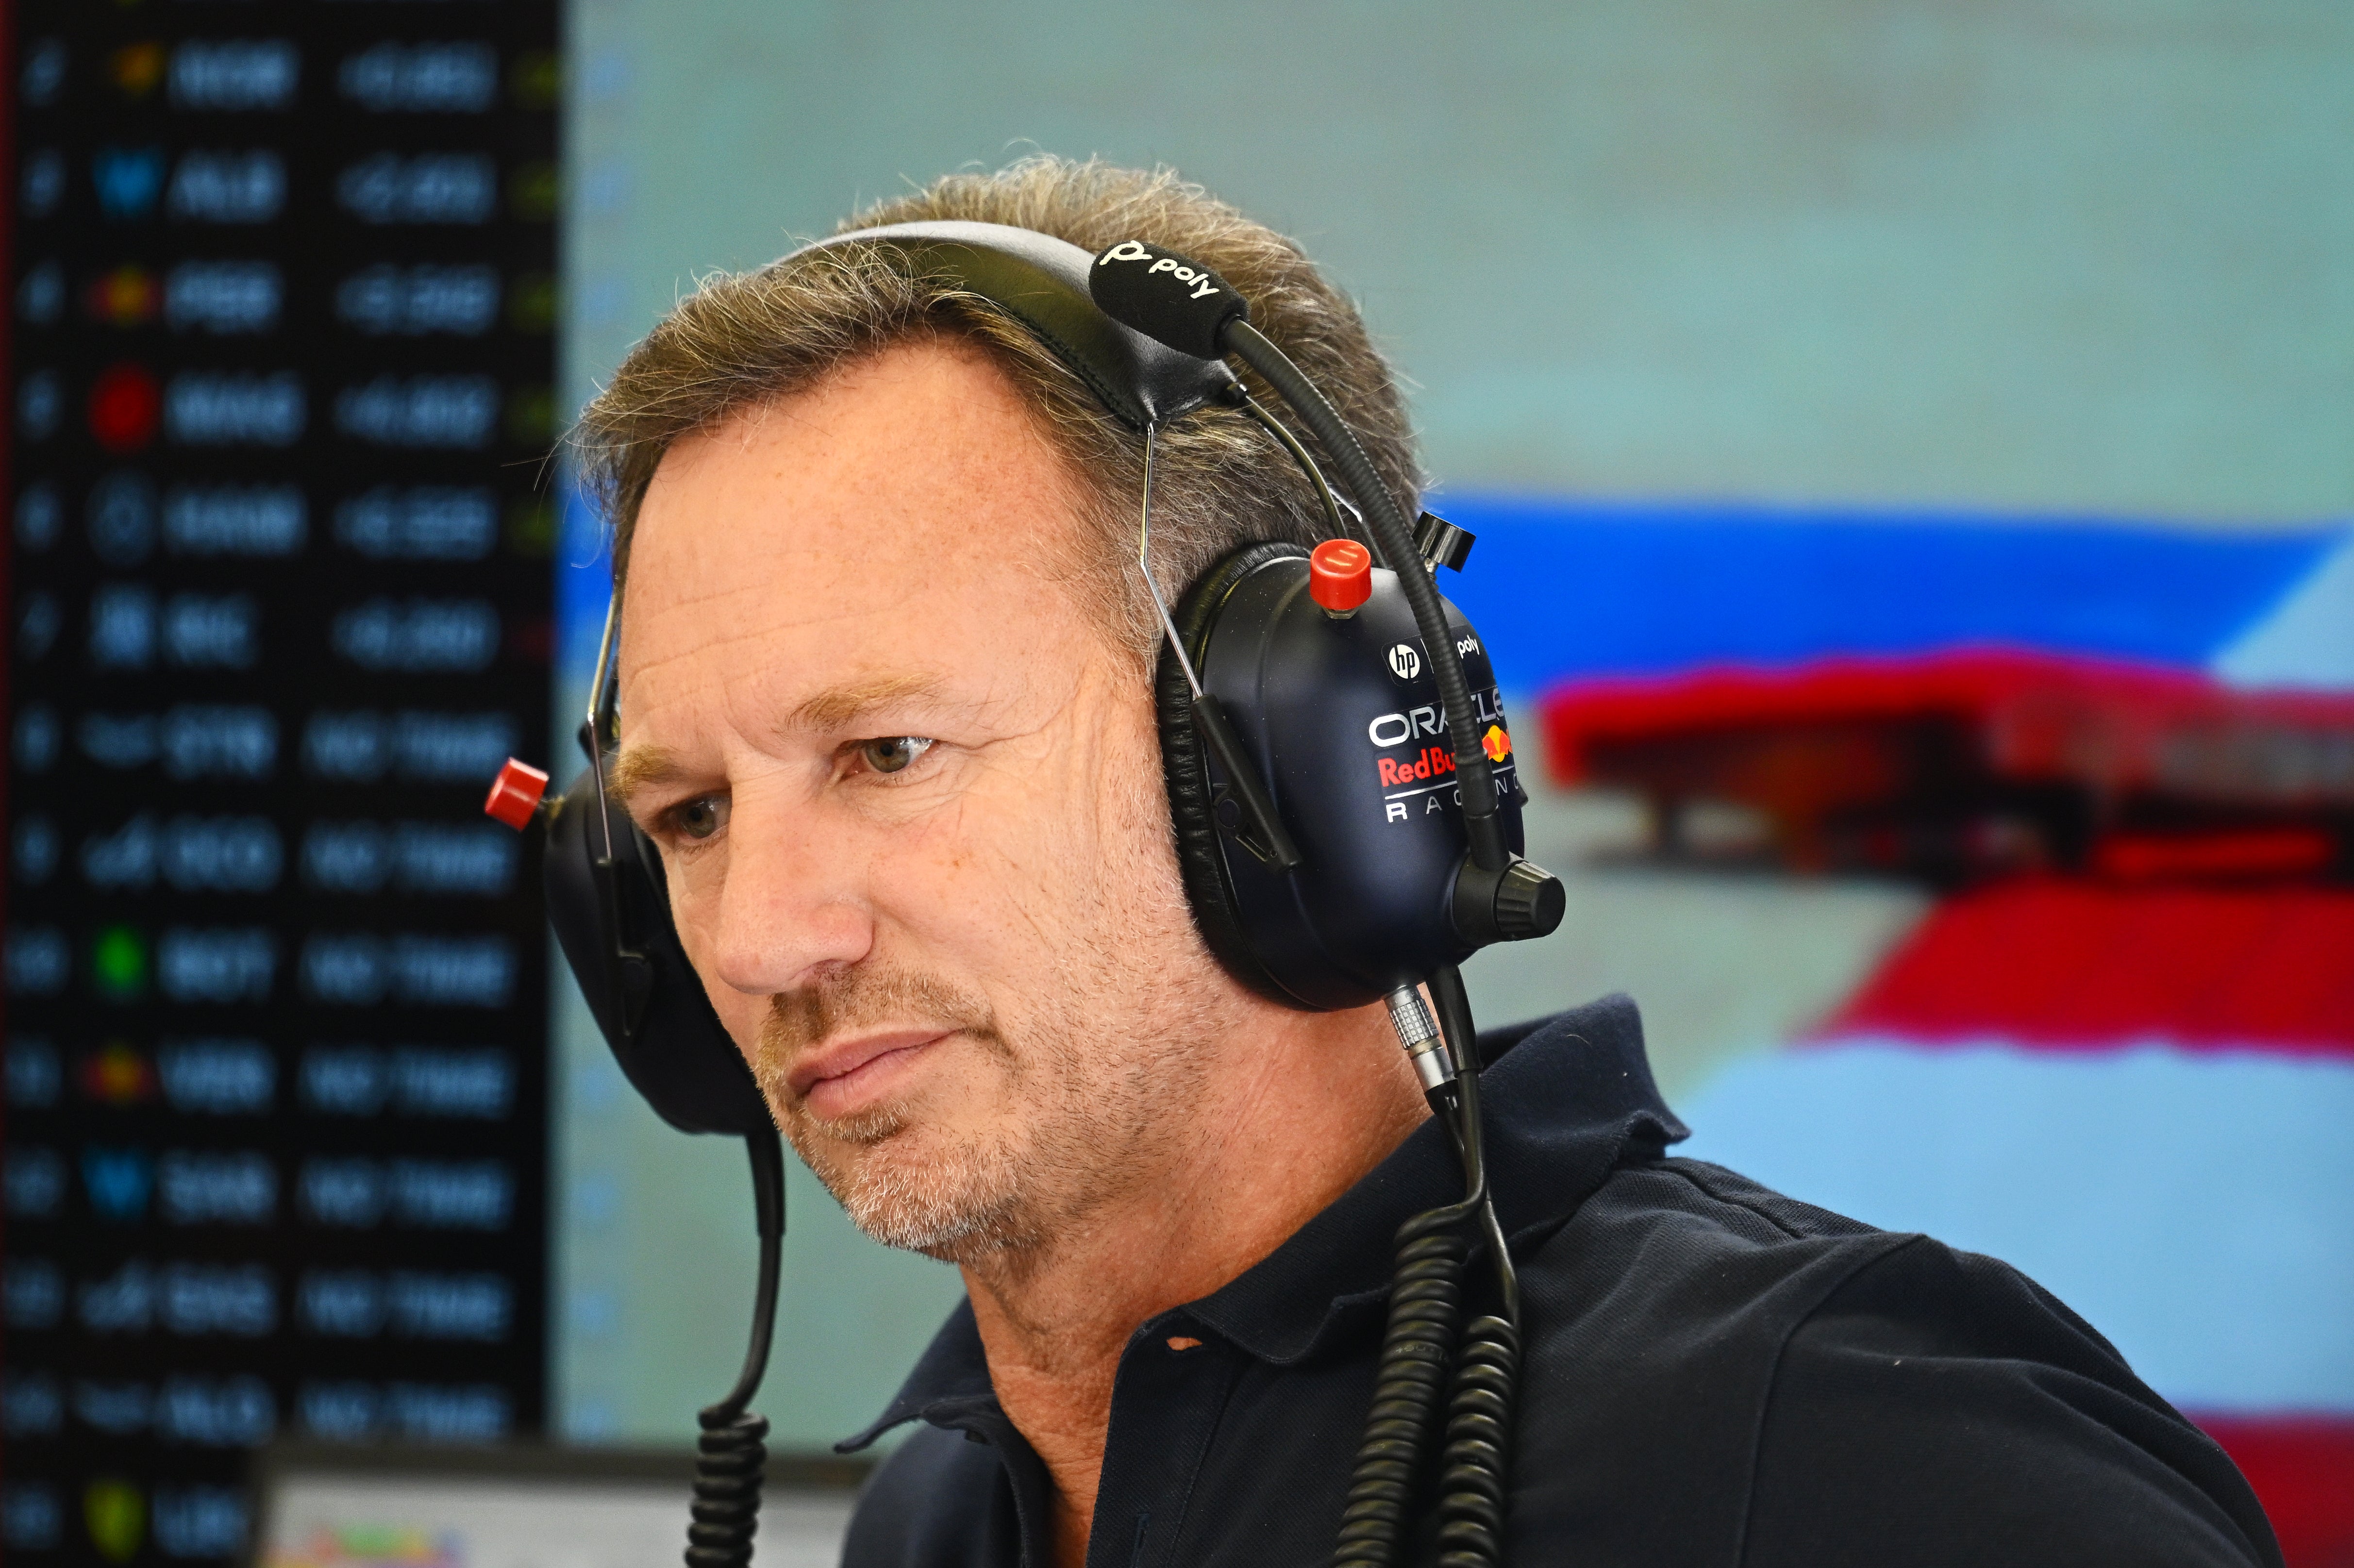 Christian Horner has been present in the paddock at F1 testing this week in Bahrain